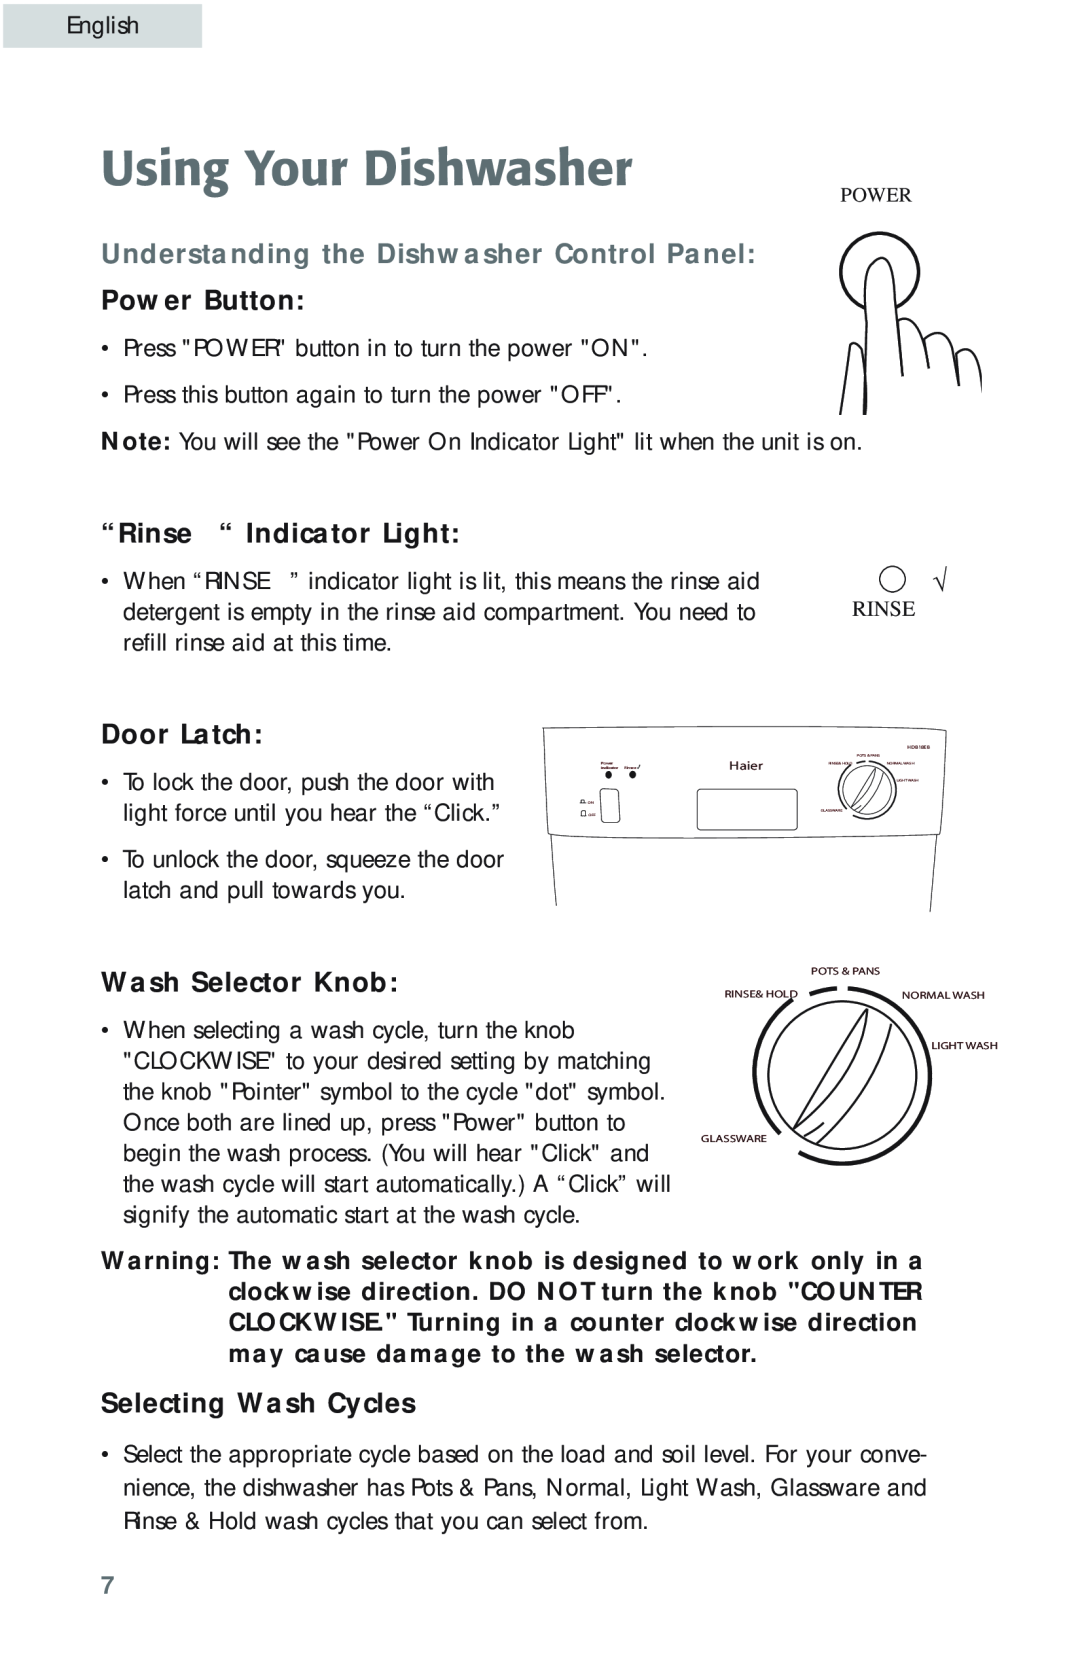 Haier HDB18EB Using Your Dishwasher, Understanding the Dishwasher Control Panel, Power Button, “Rinse “ Indicator Light 